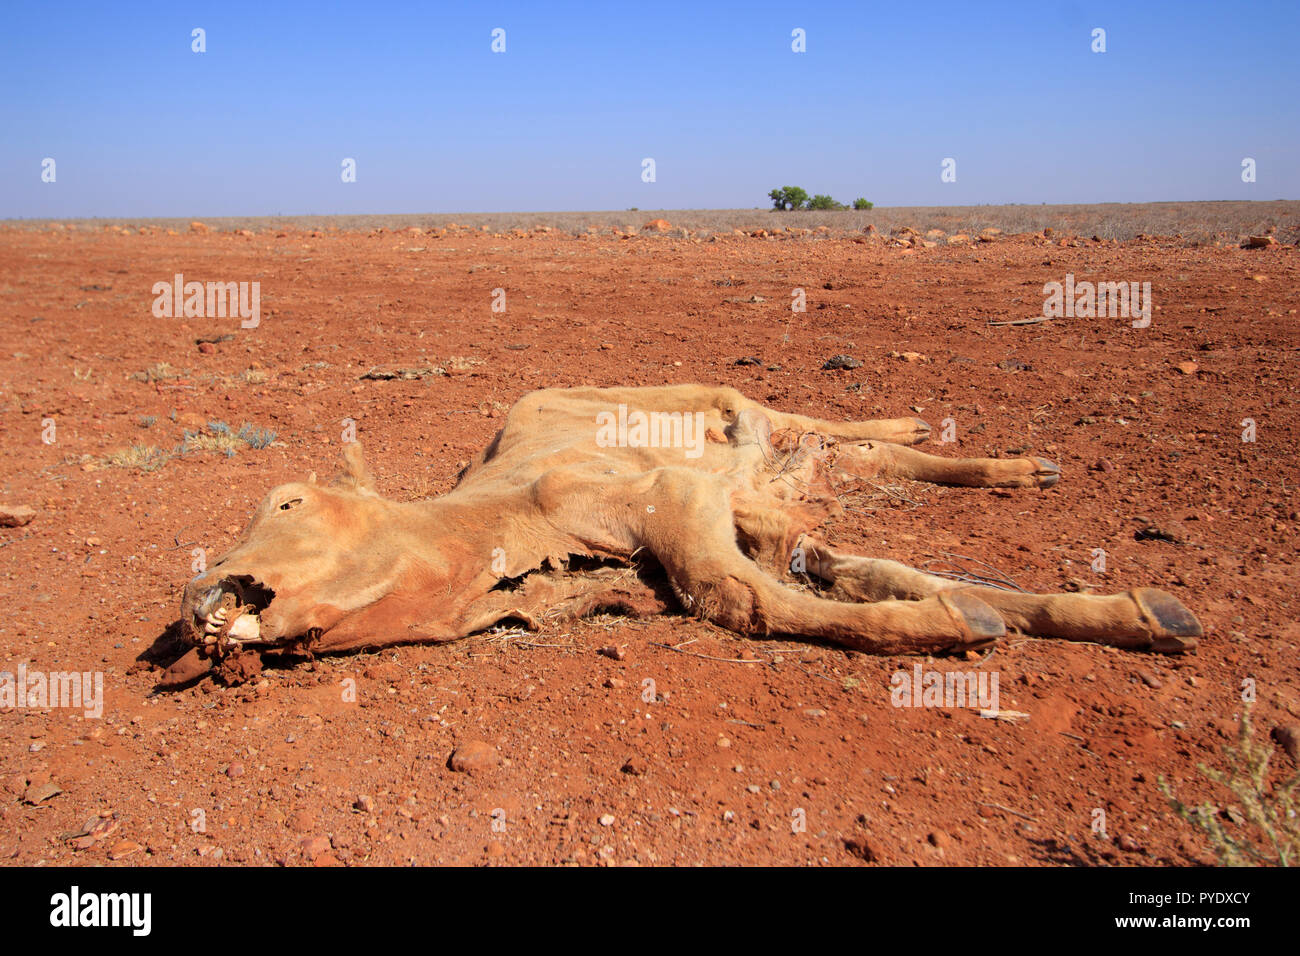 A dead mummified calf in outback Australian desert with red soil and blue sky. Stock Photo